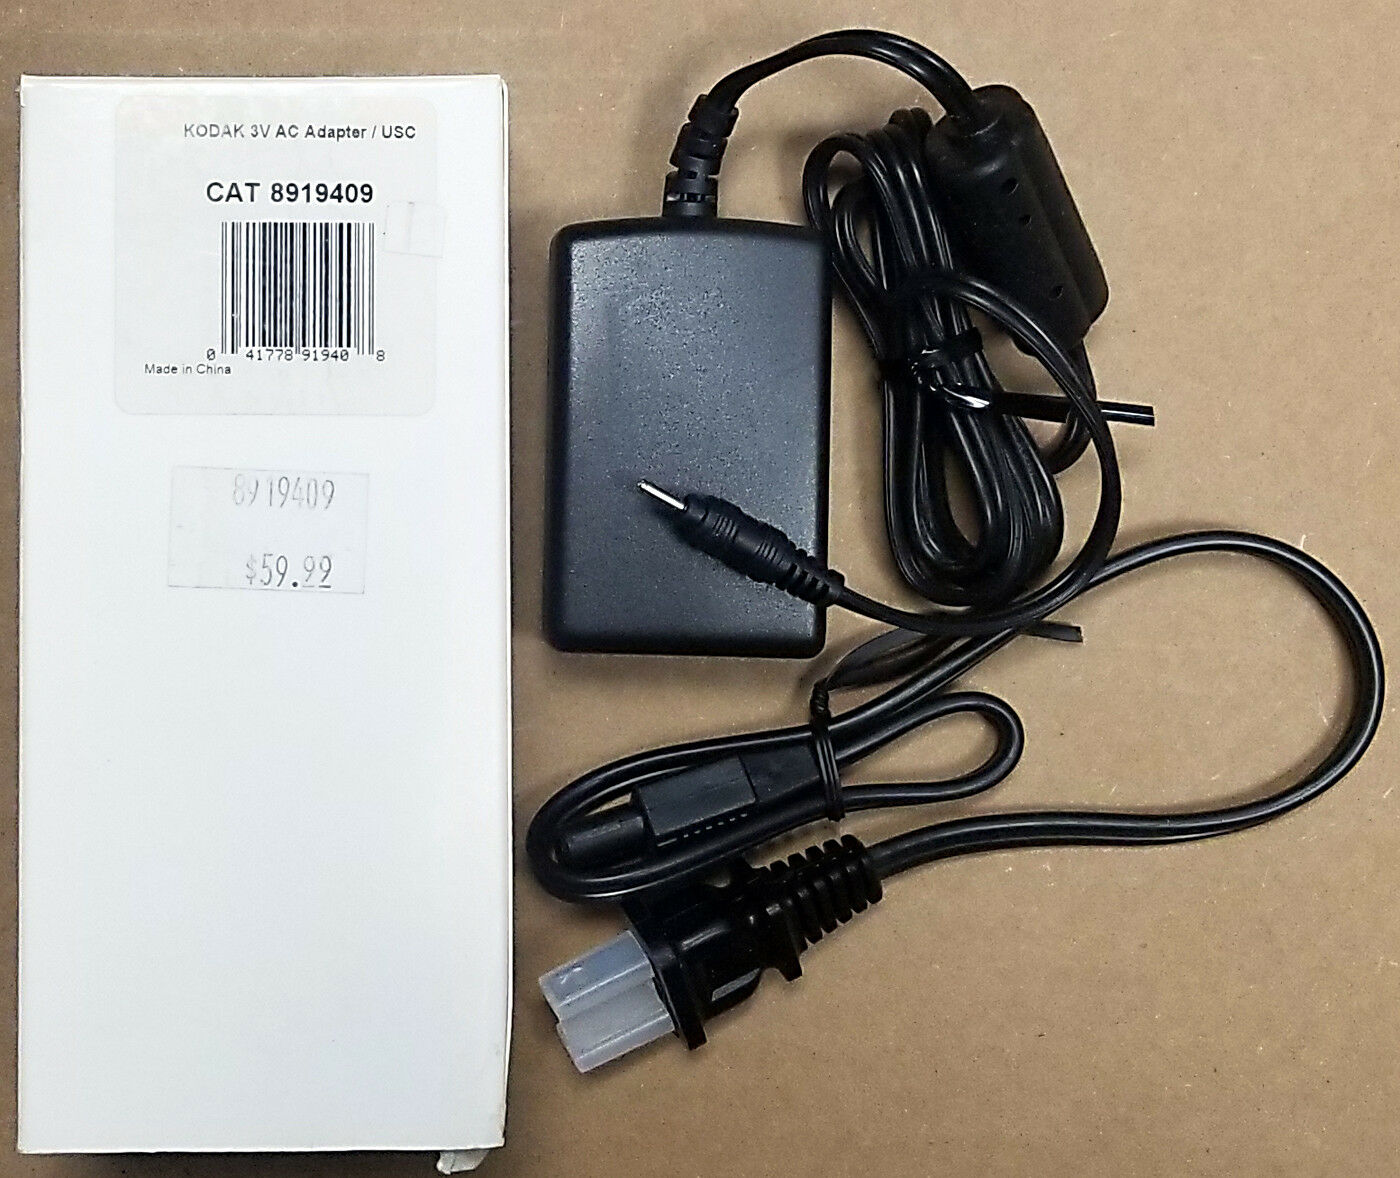 Kodak 8919409 AC Adapter Power Cord Supply Charger Cable Wire Digital Camera EasyShare Genuine Original